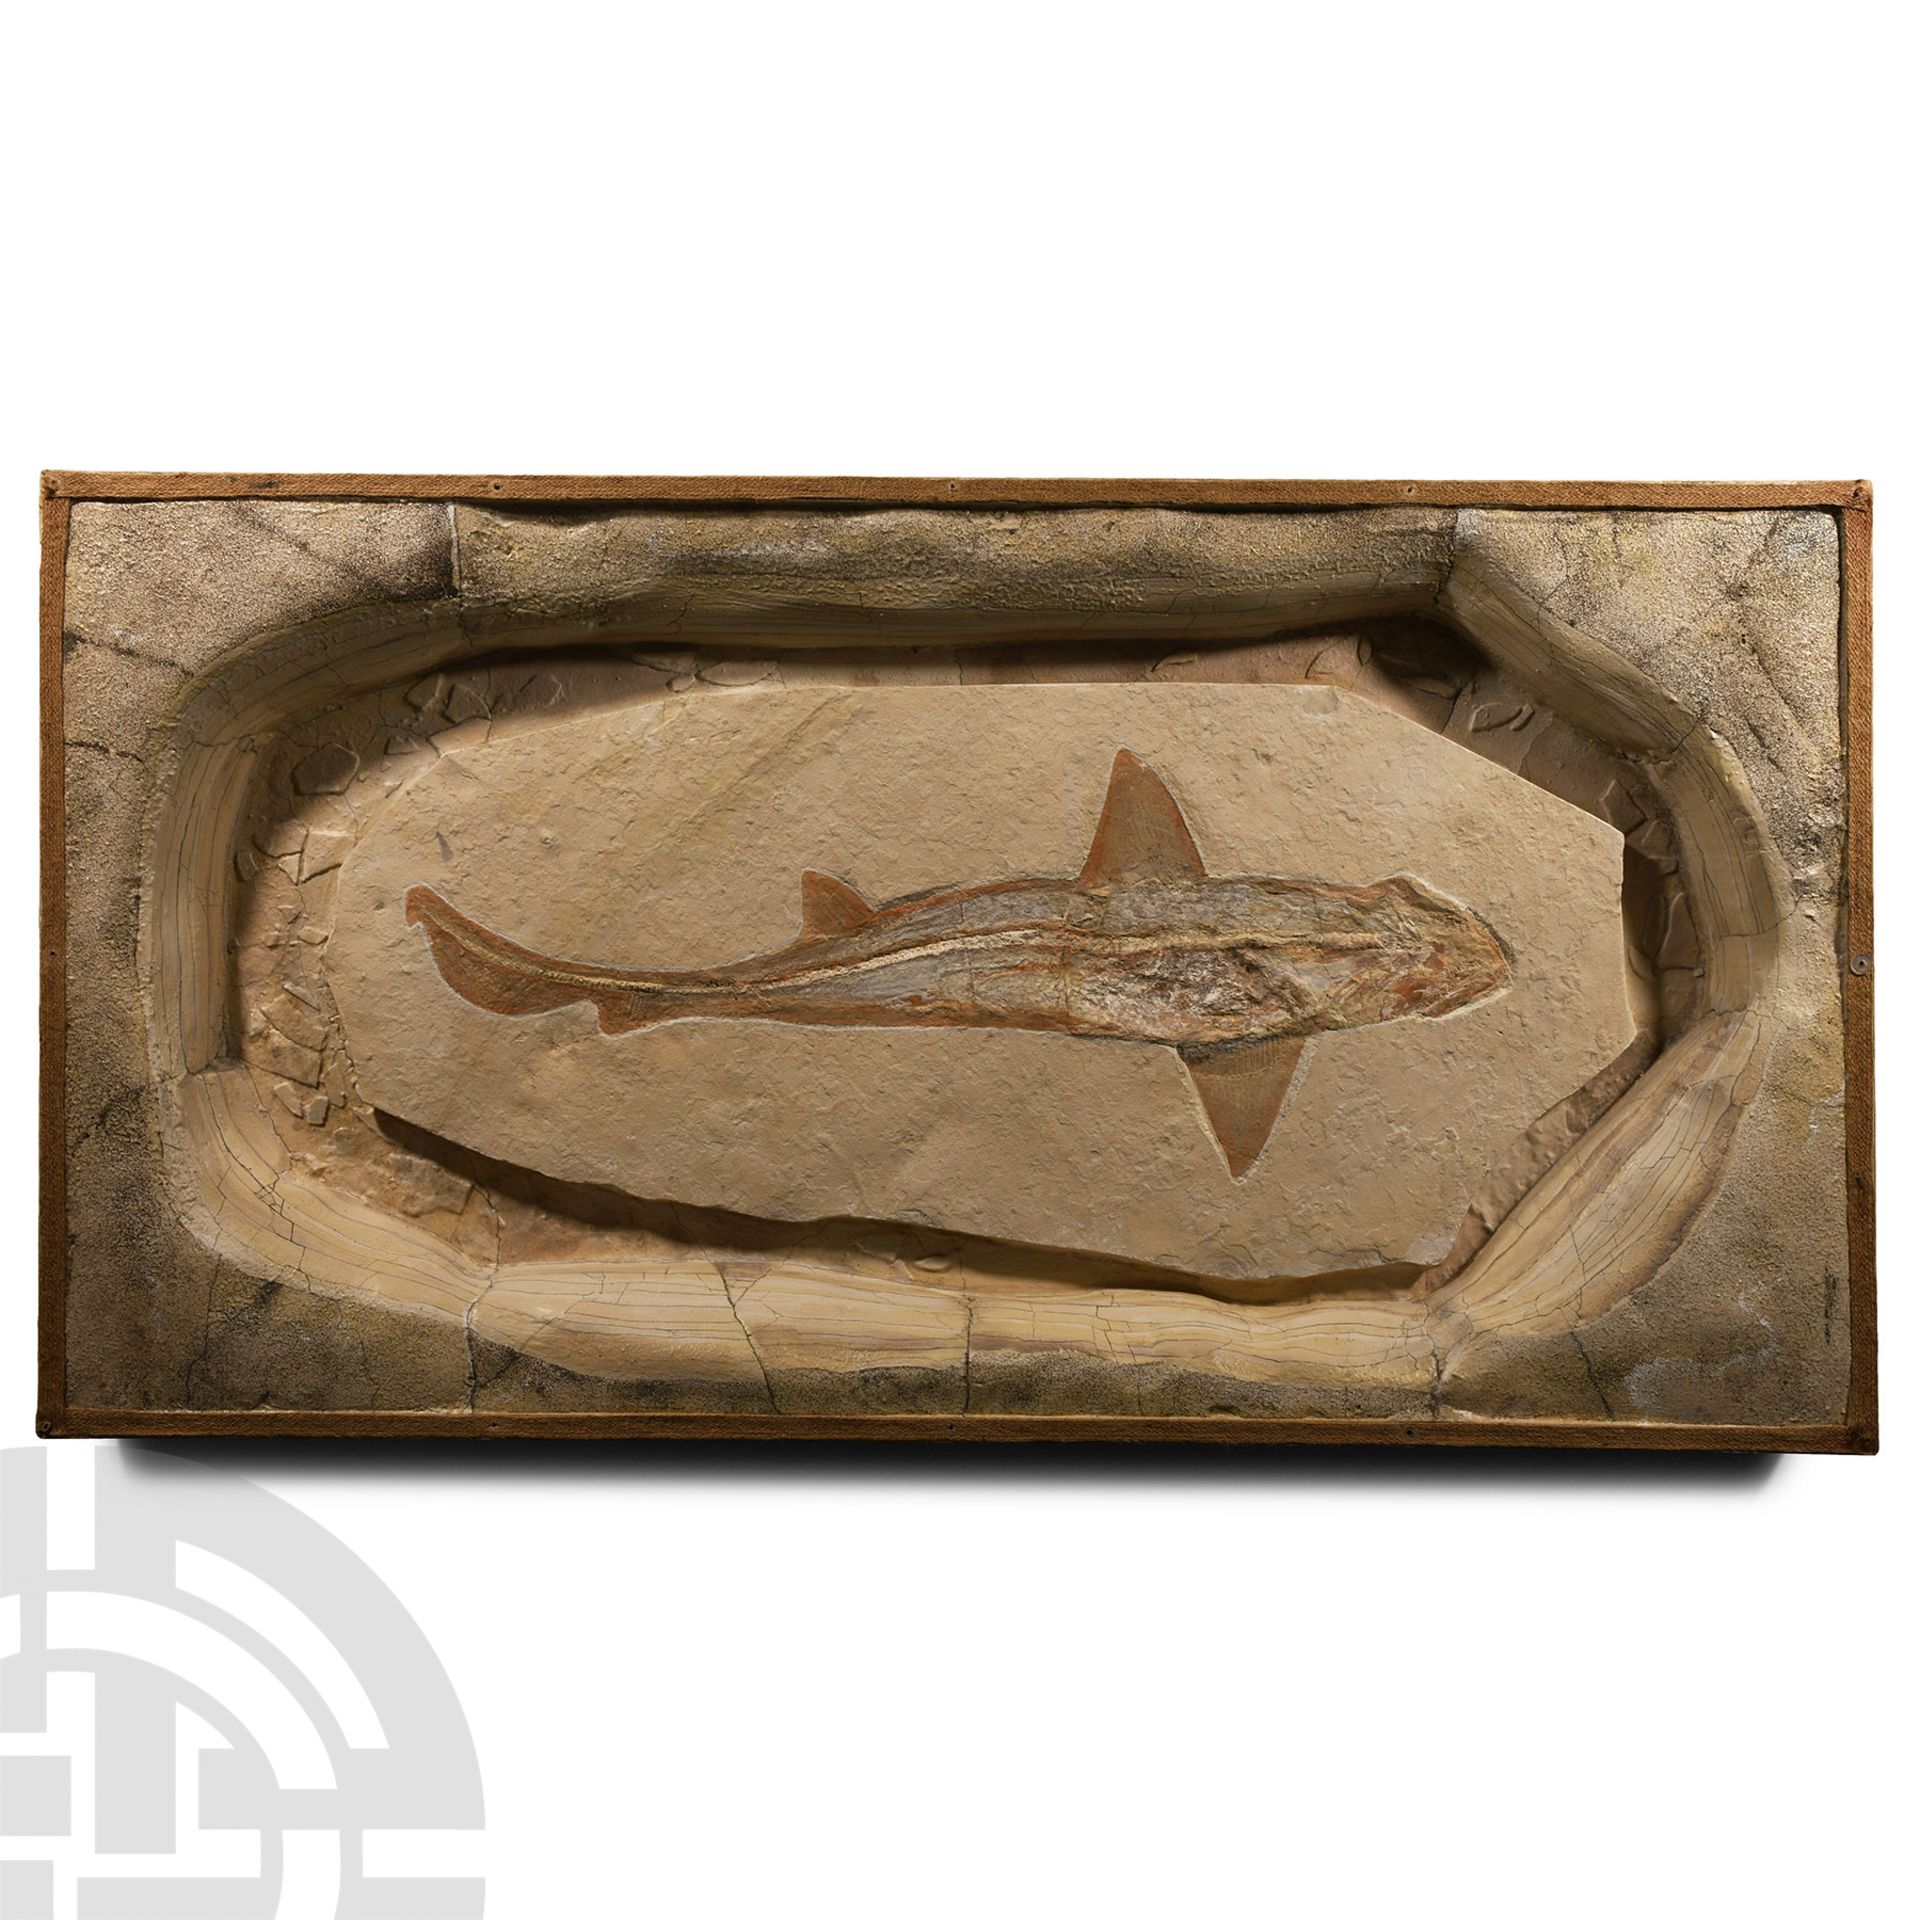 Natural History - Cretaceous Fossil Reef Shark